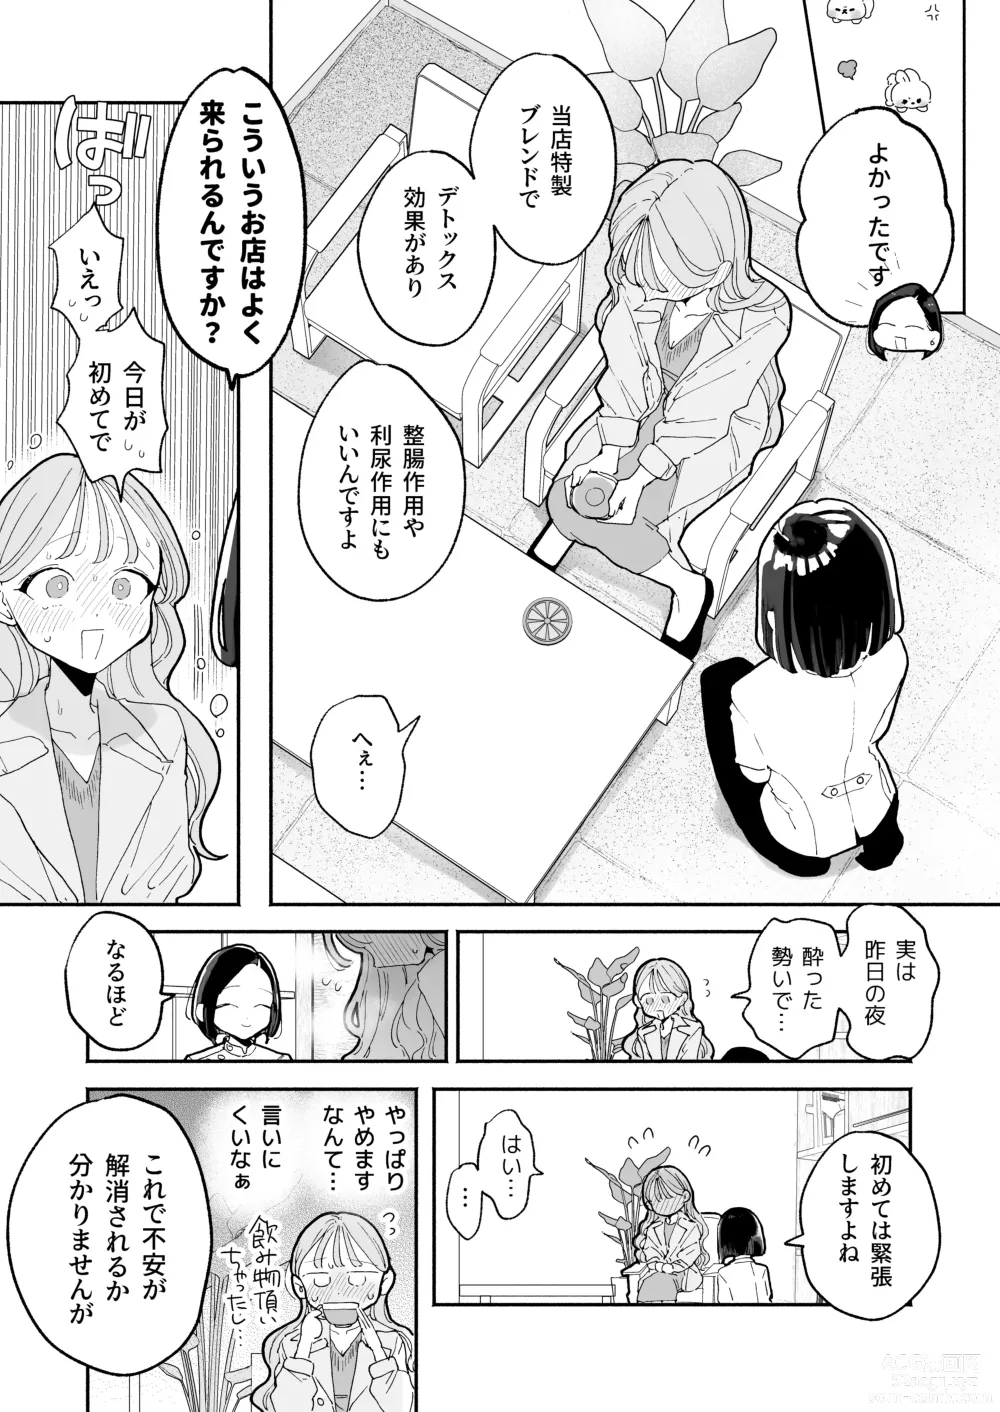 Page 5 of doujinshi Climax Reflex A story about a girl who becomes ◯◯ at an erotic massage shop in front of the station